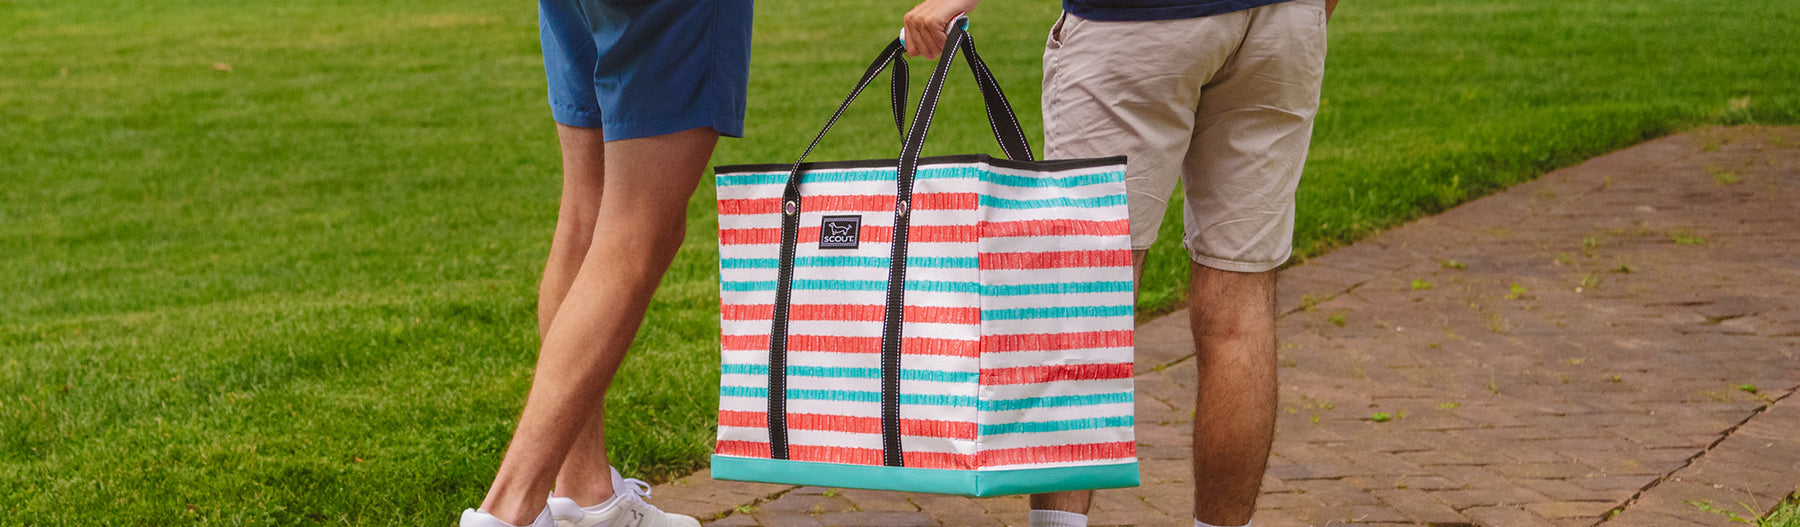 Extra-Large Tote Bags